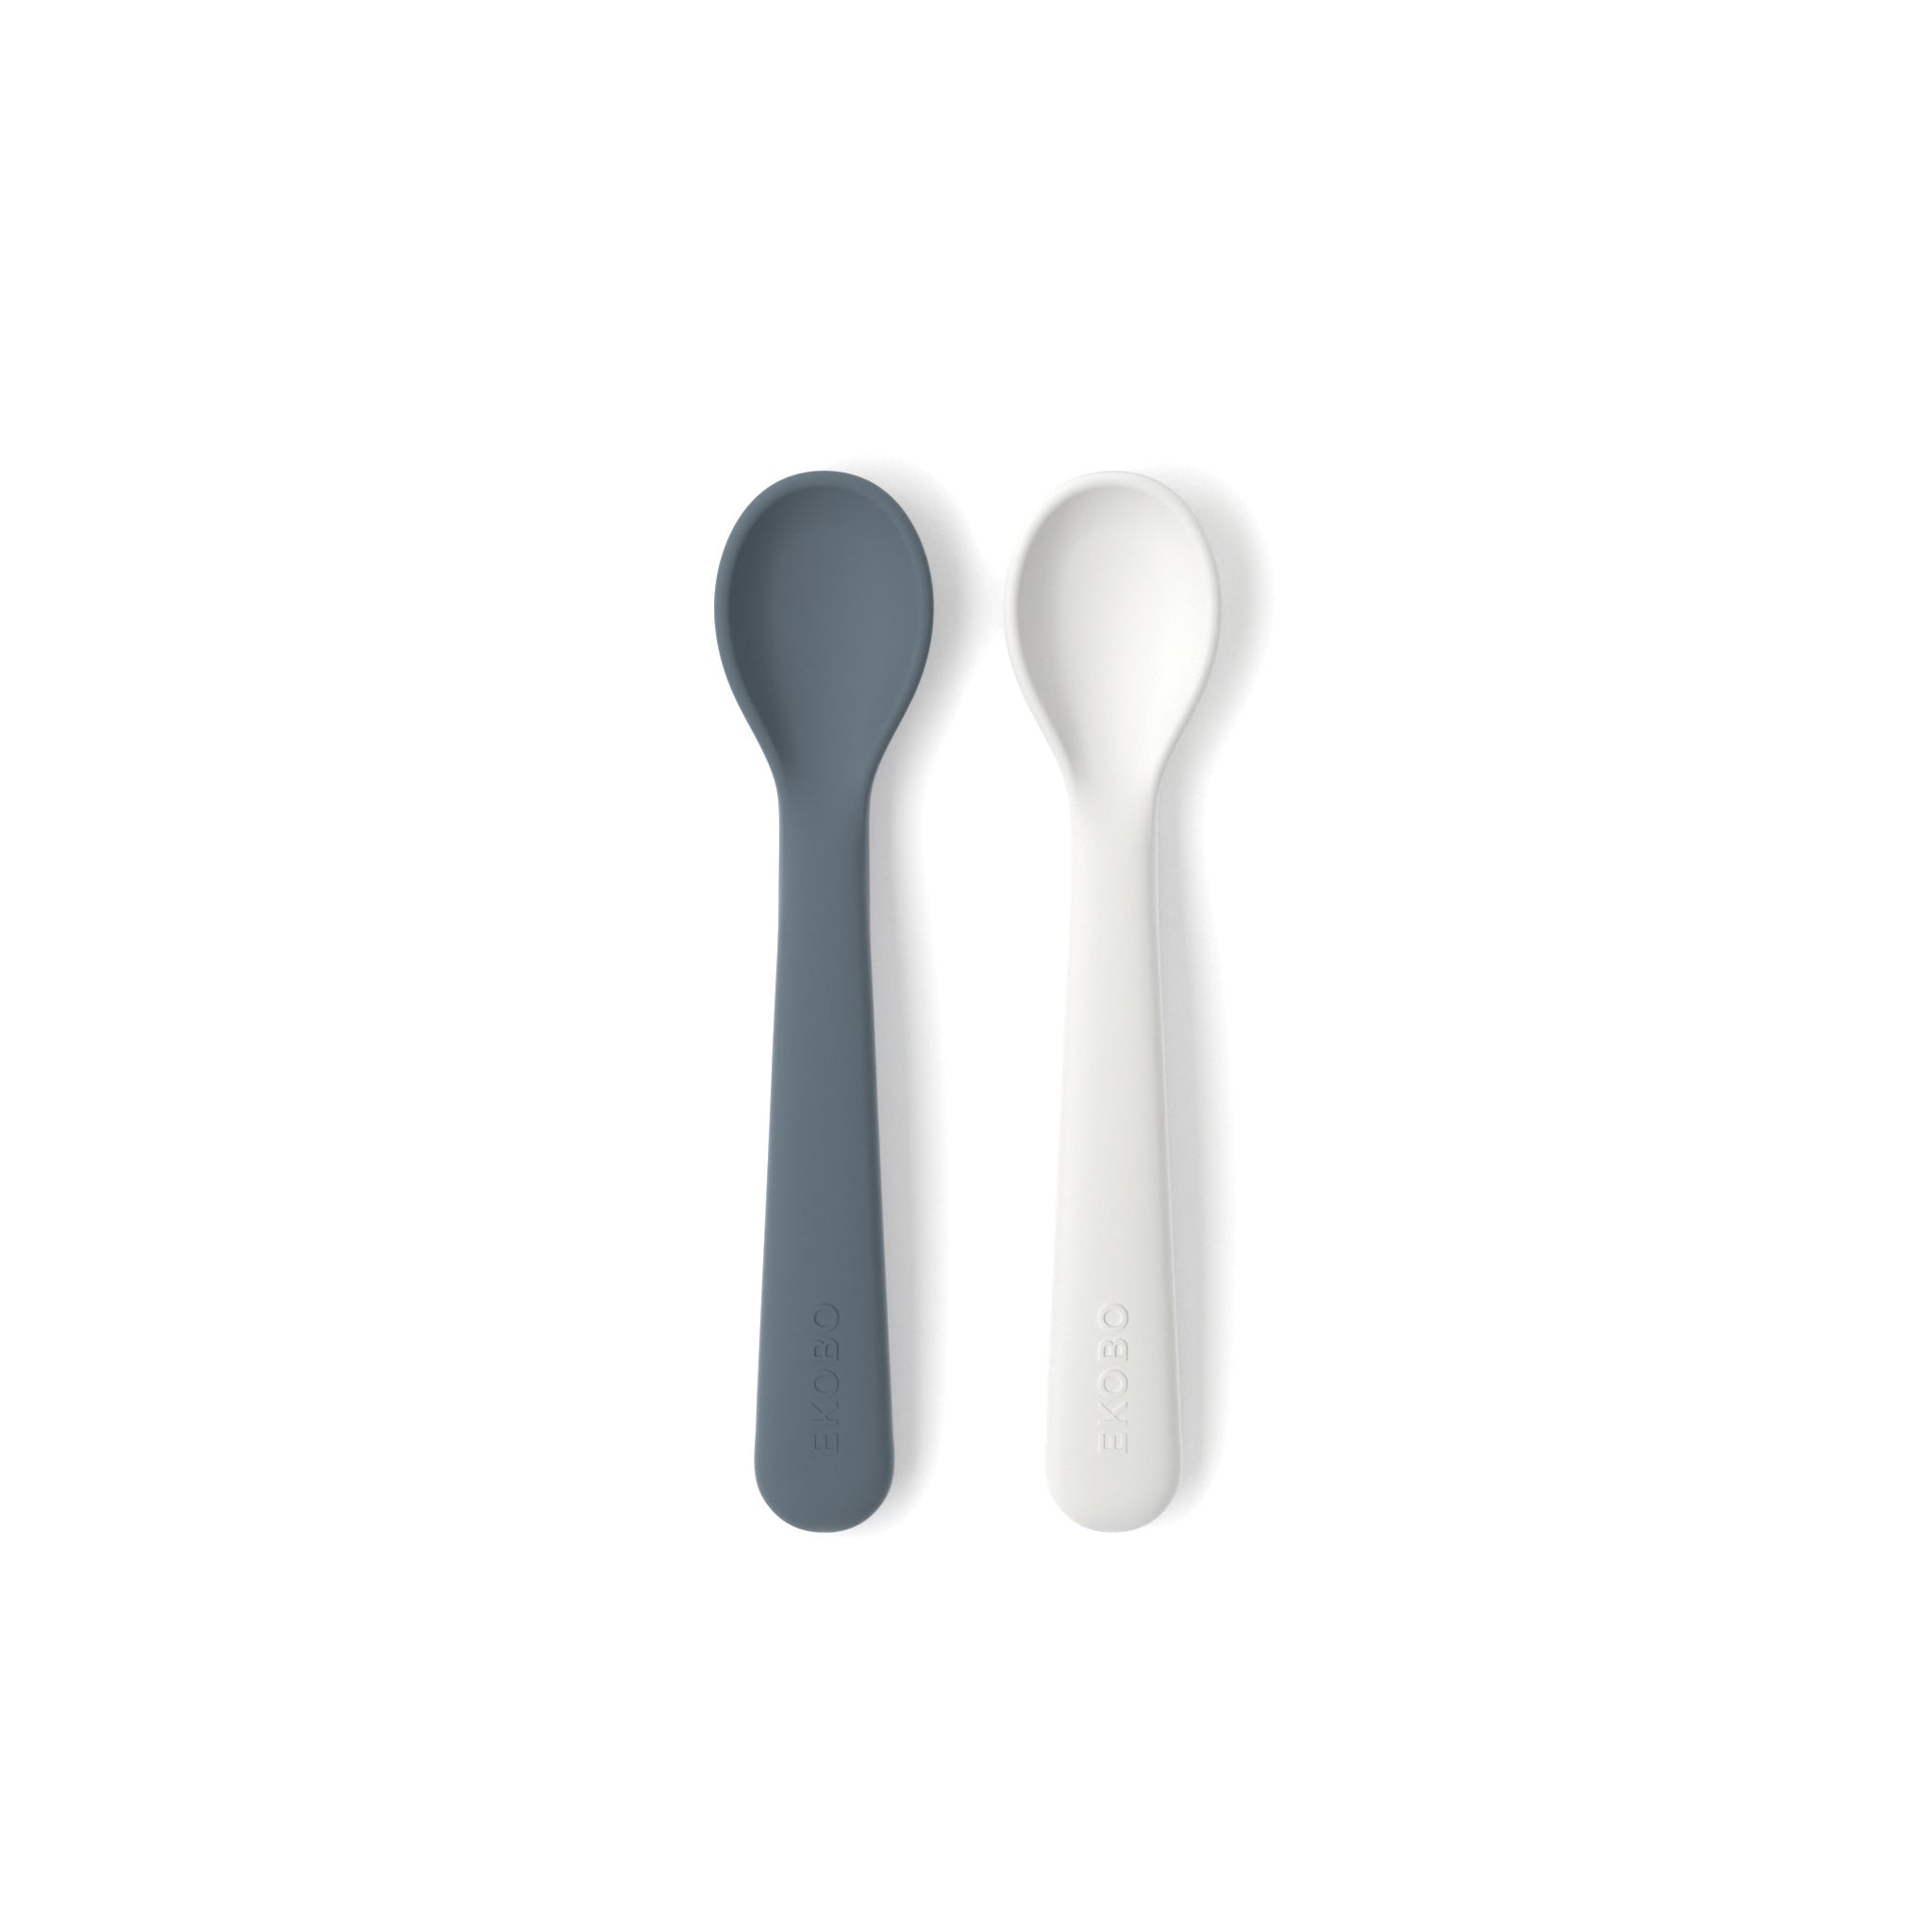 Silicone Baby Spoon Set – The Saturday Baby